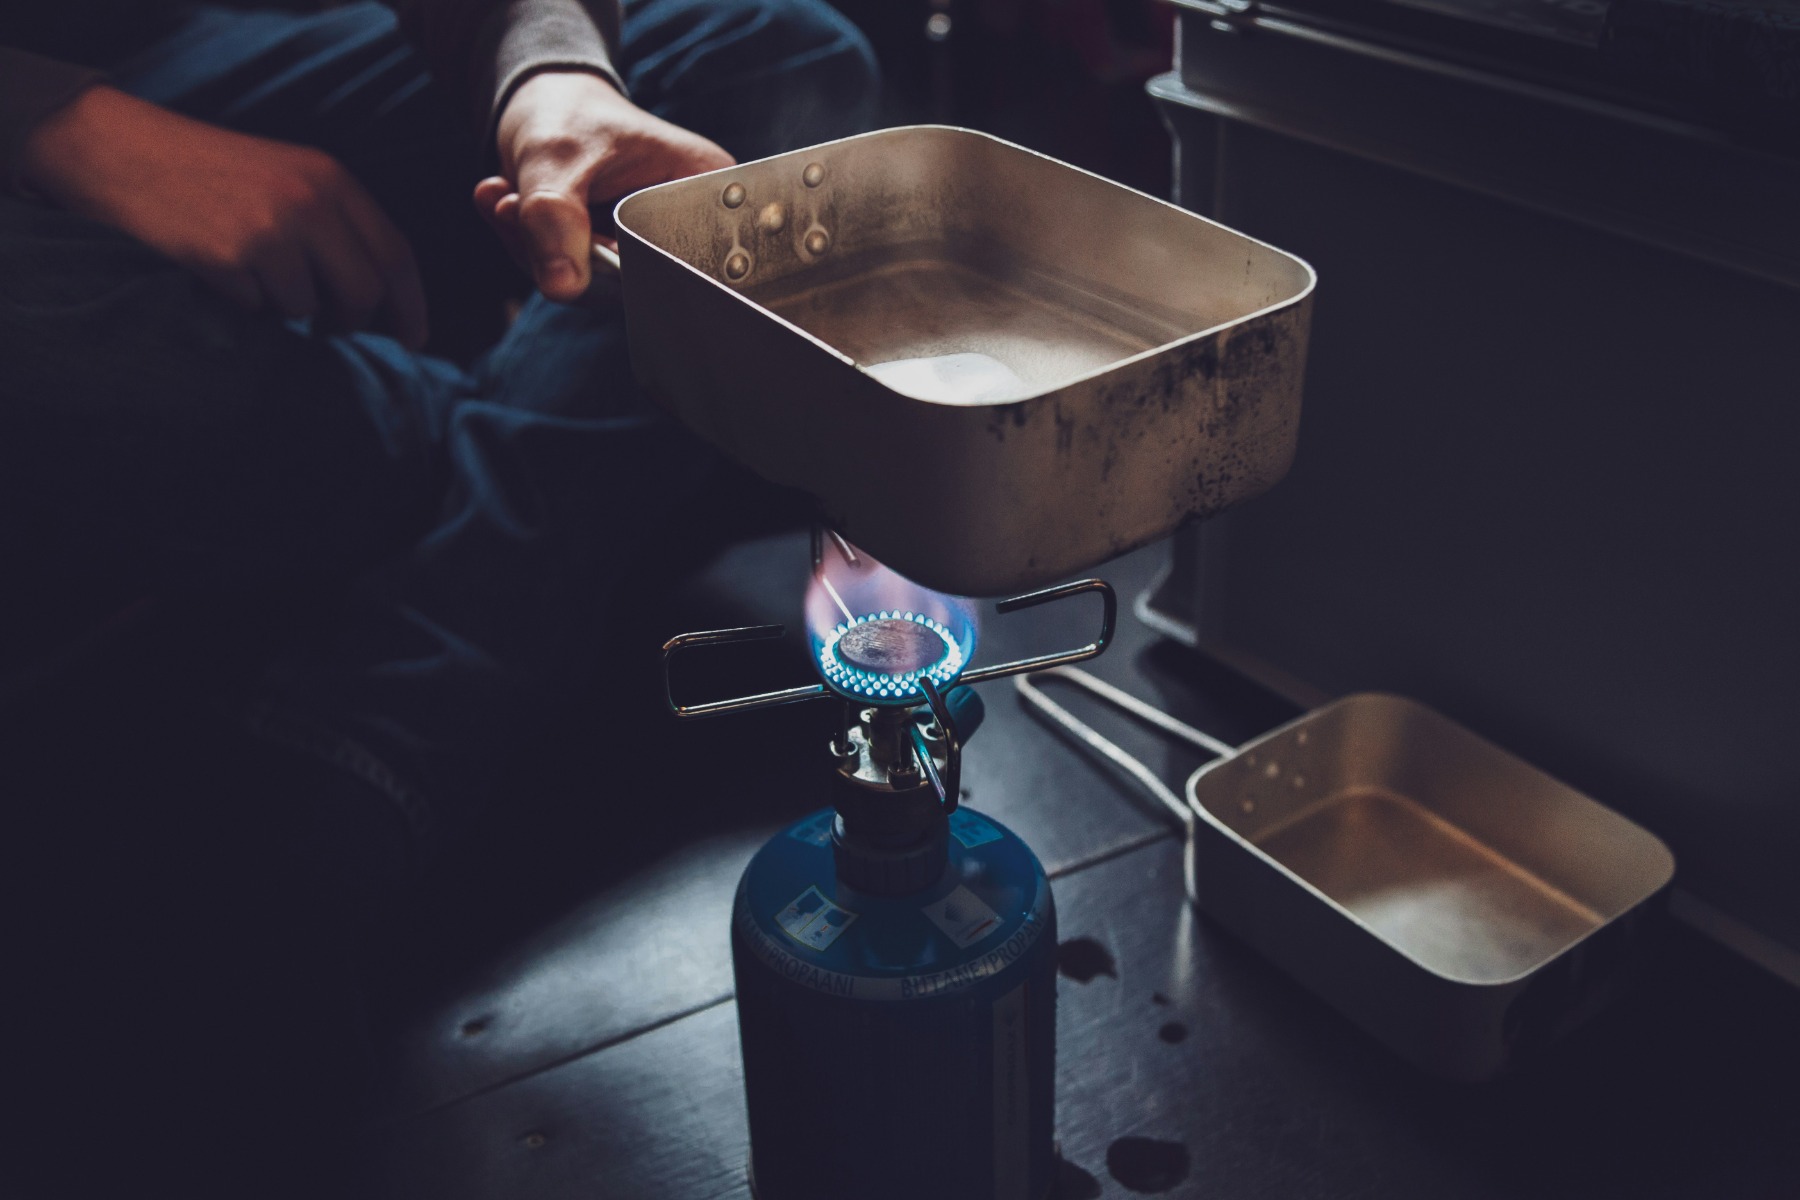 Person heating water using a blue propane tank